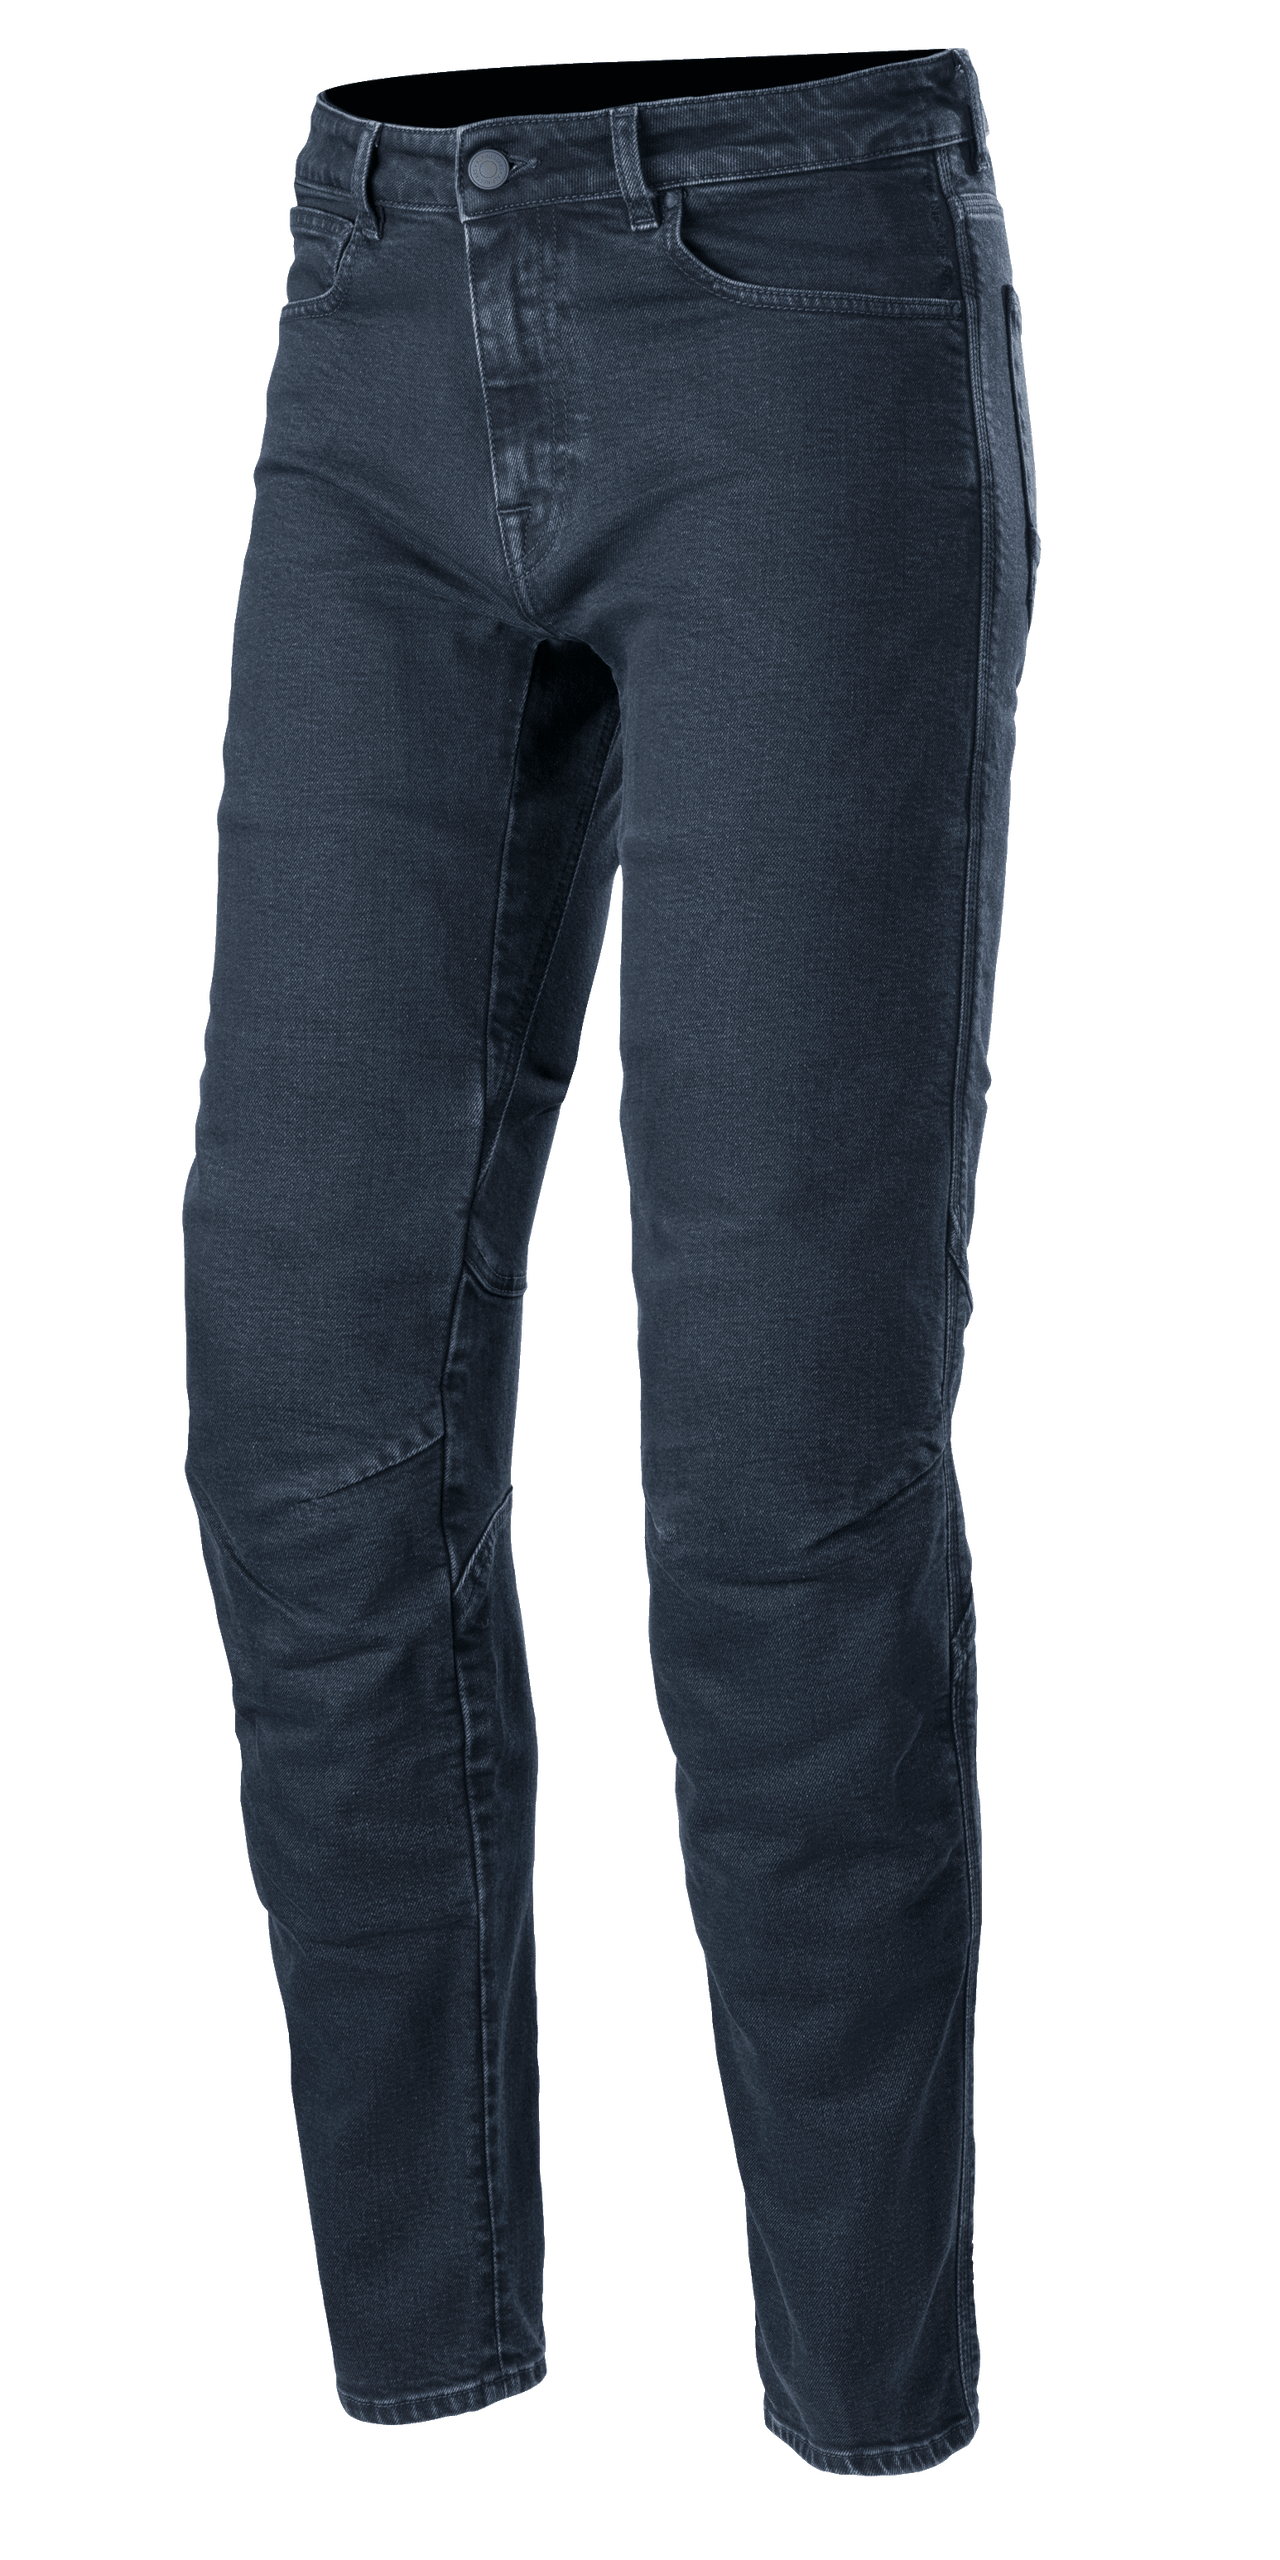 Road Riding Jeans